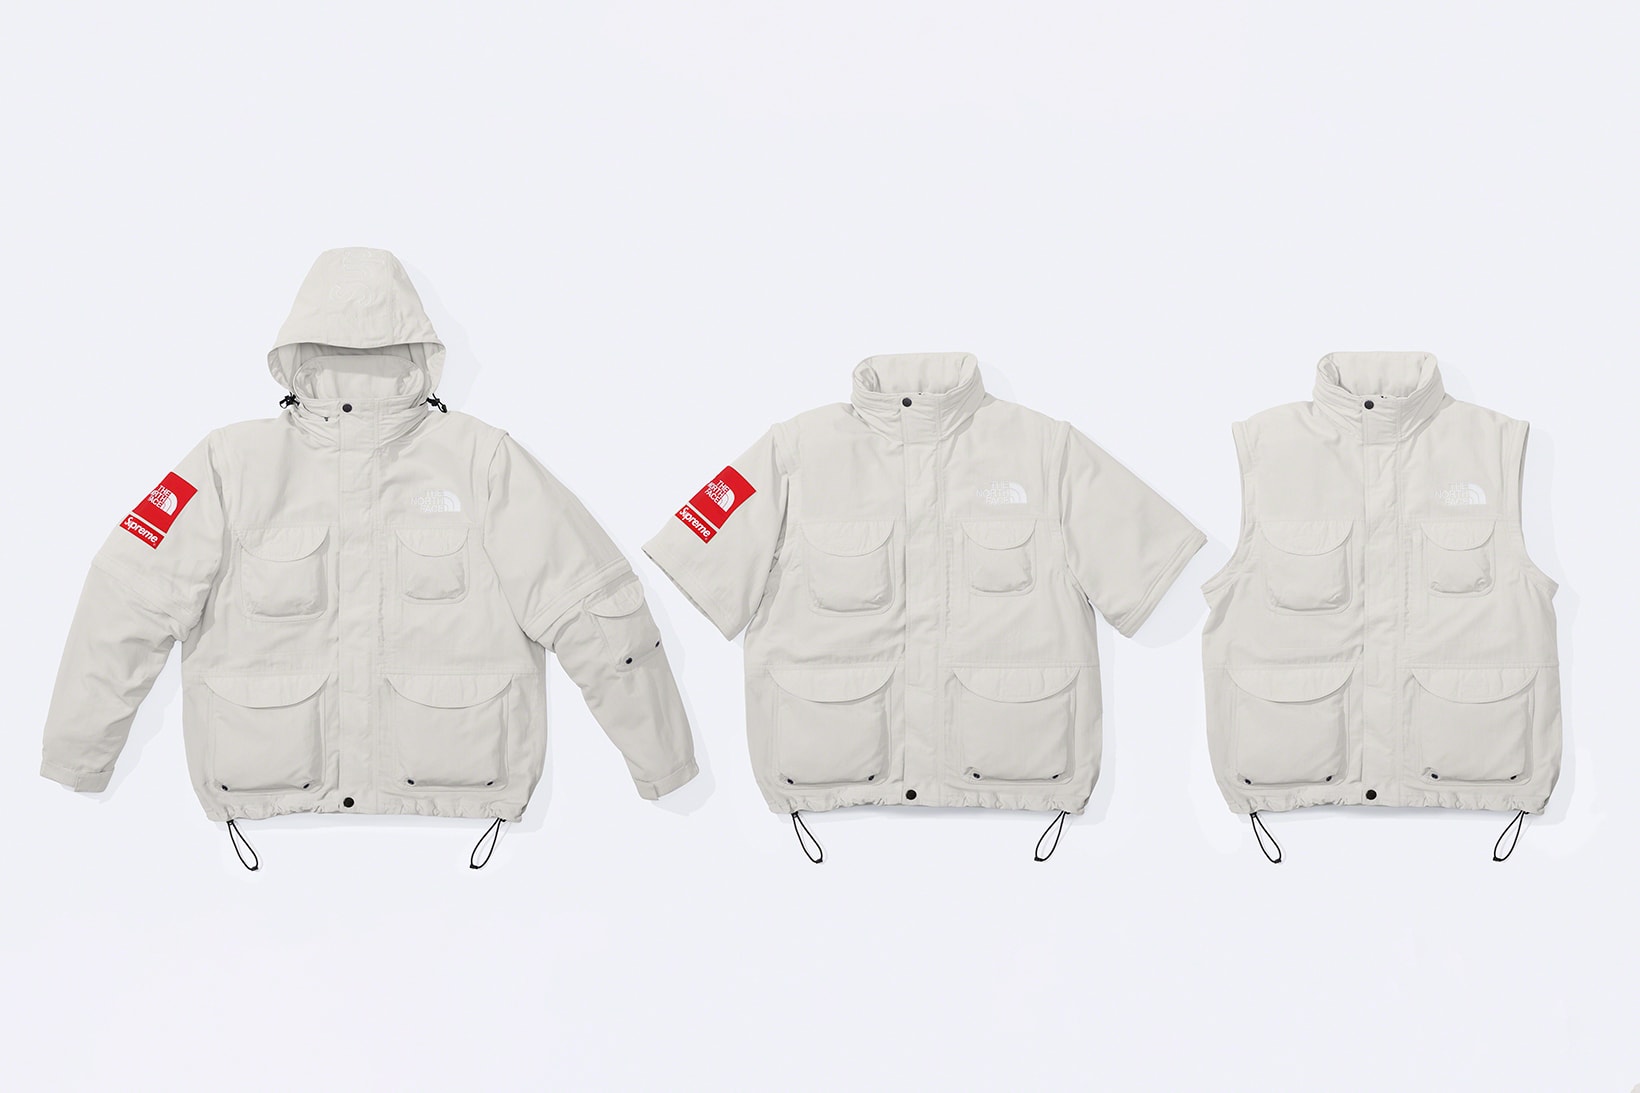 The North Face Supreme Spring 2022 Collection Collaboration 